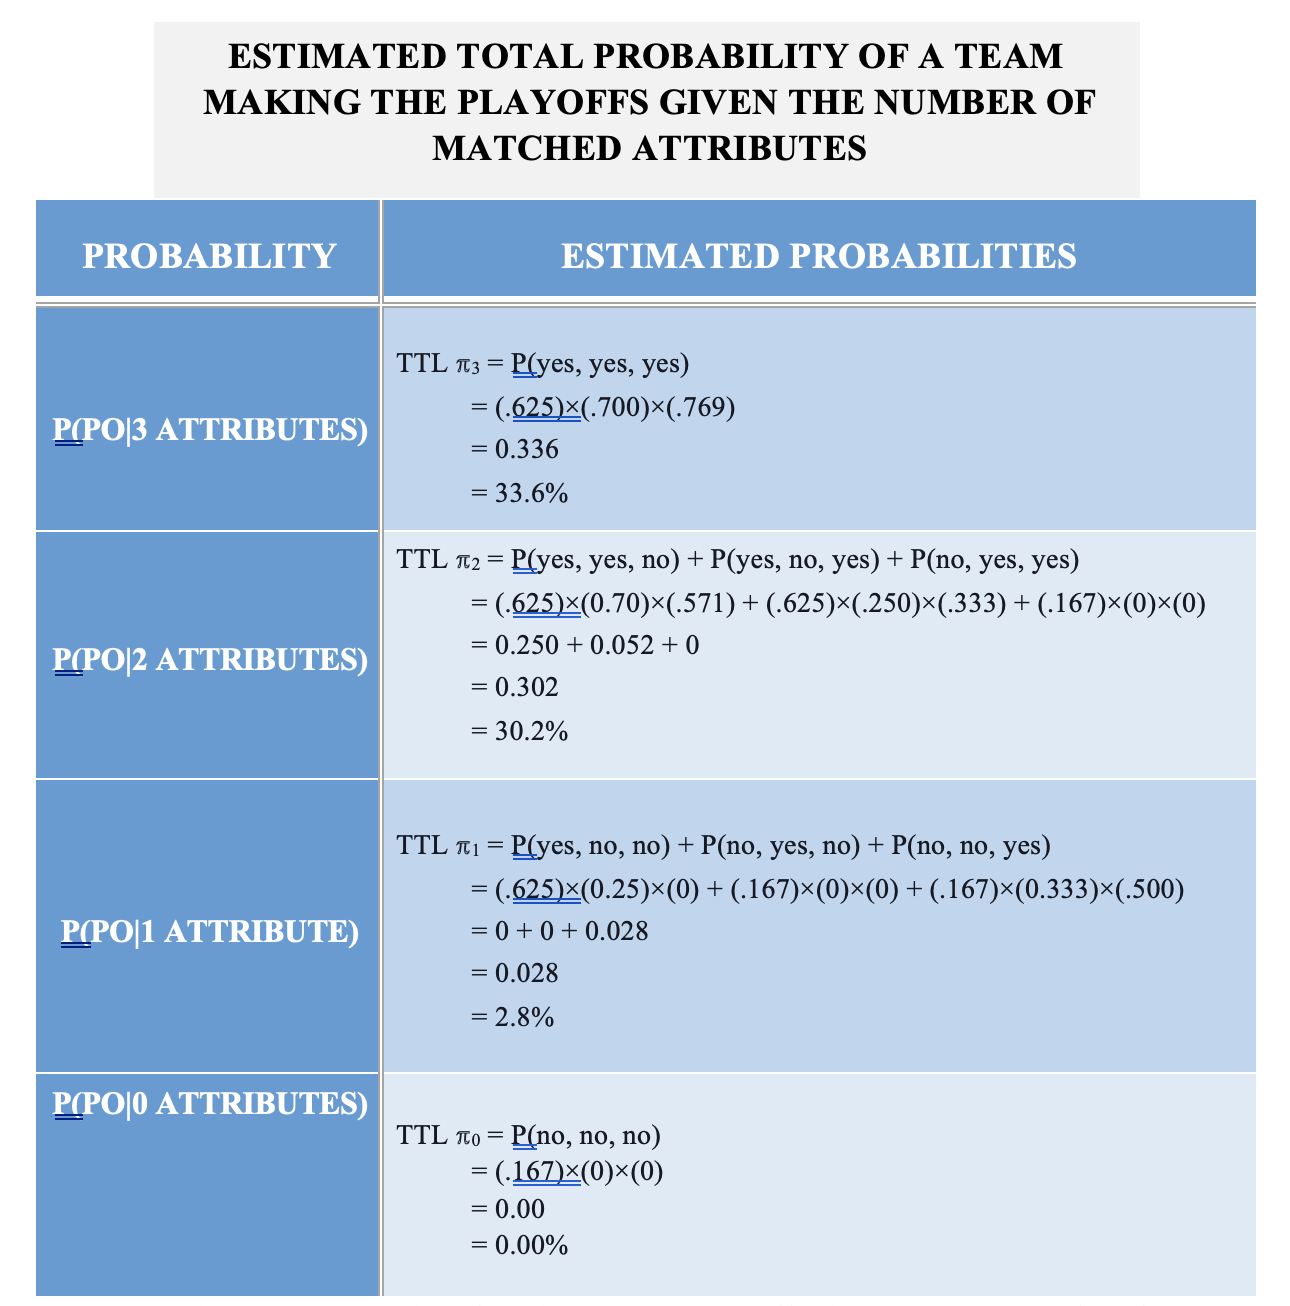 Playoff Probability graphic